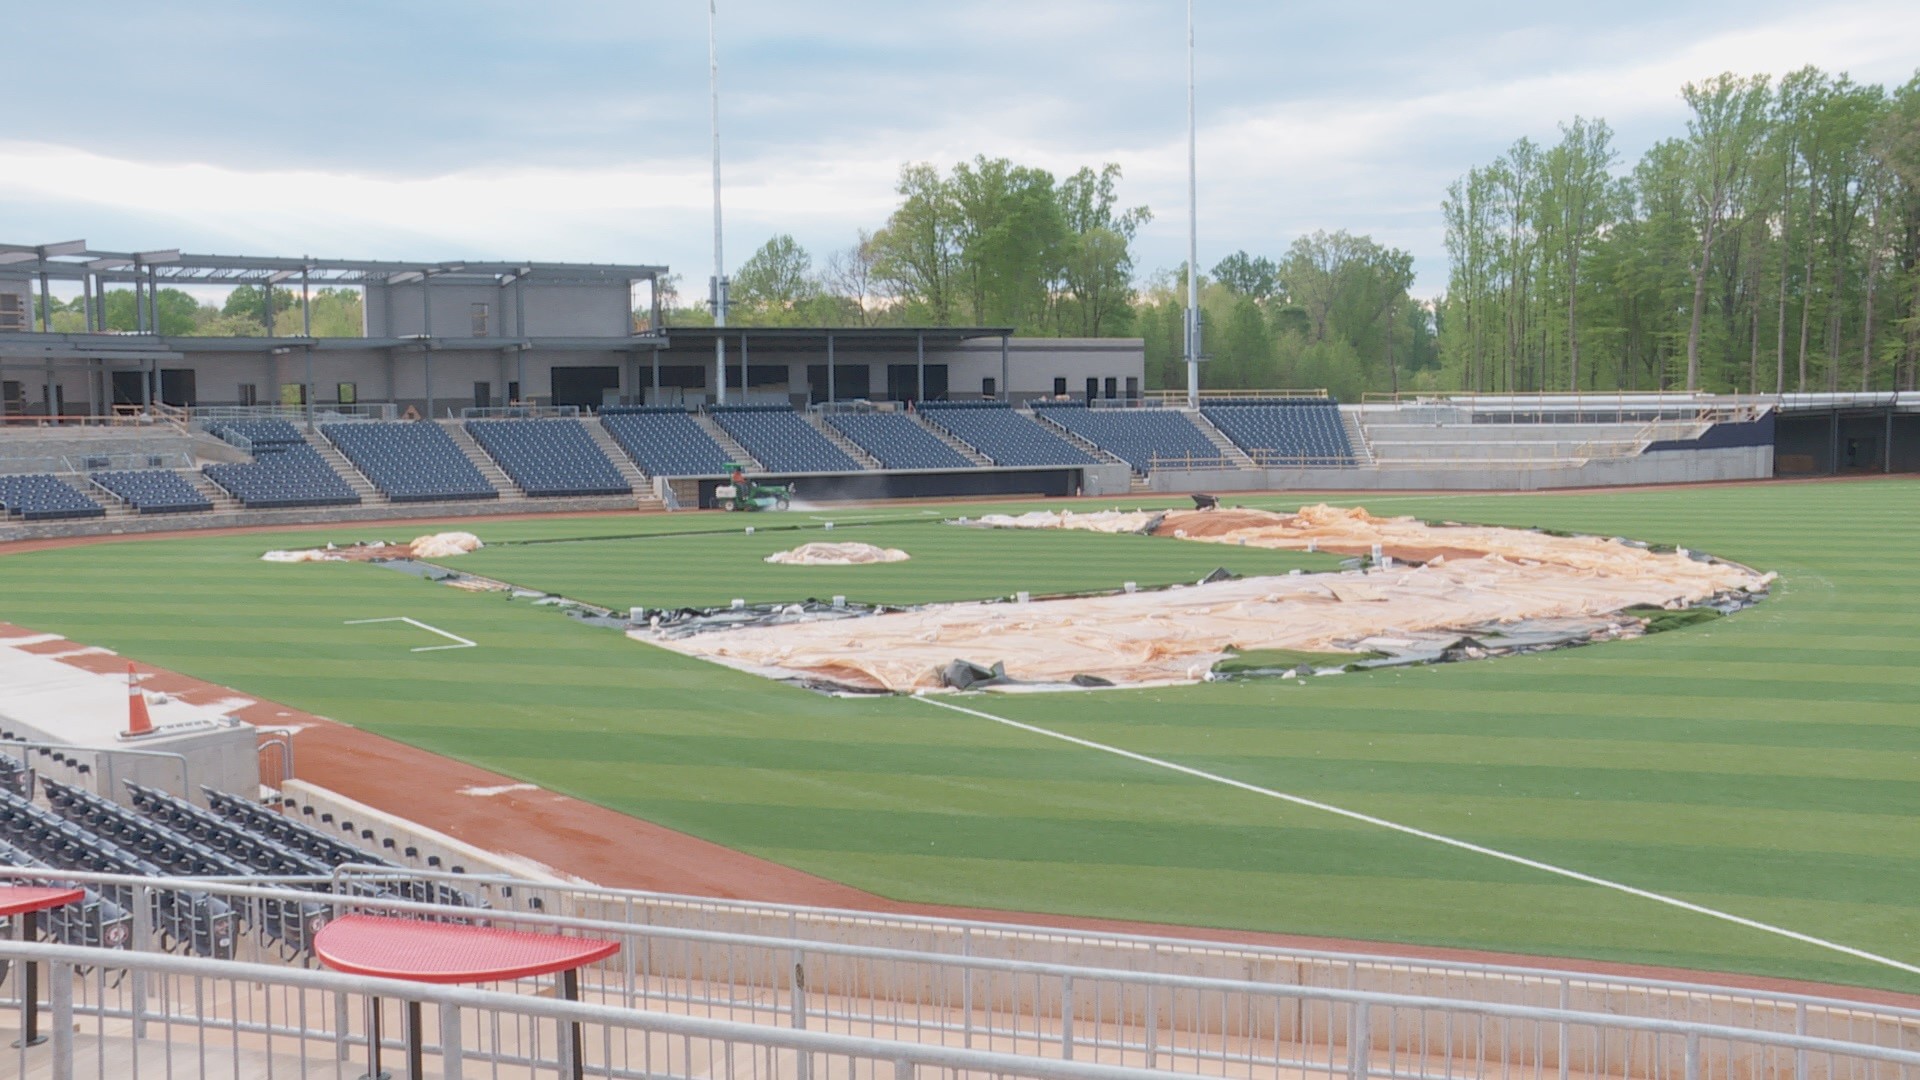 The minor league baseball team planned to show off its new ballpark to fans Thursday during its previously scheduled home opener against the Frederick Keys.